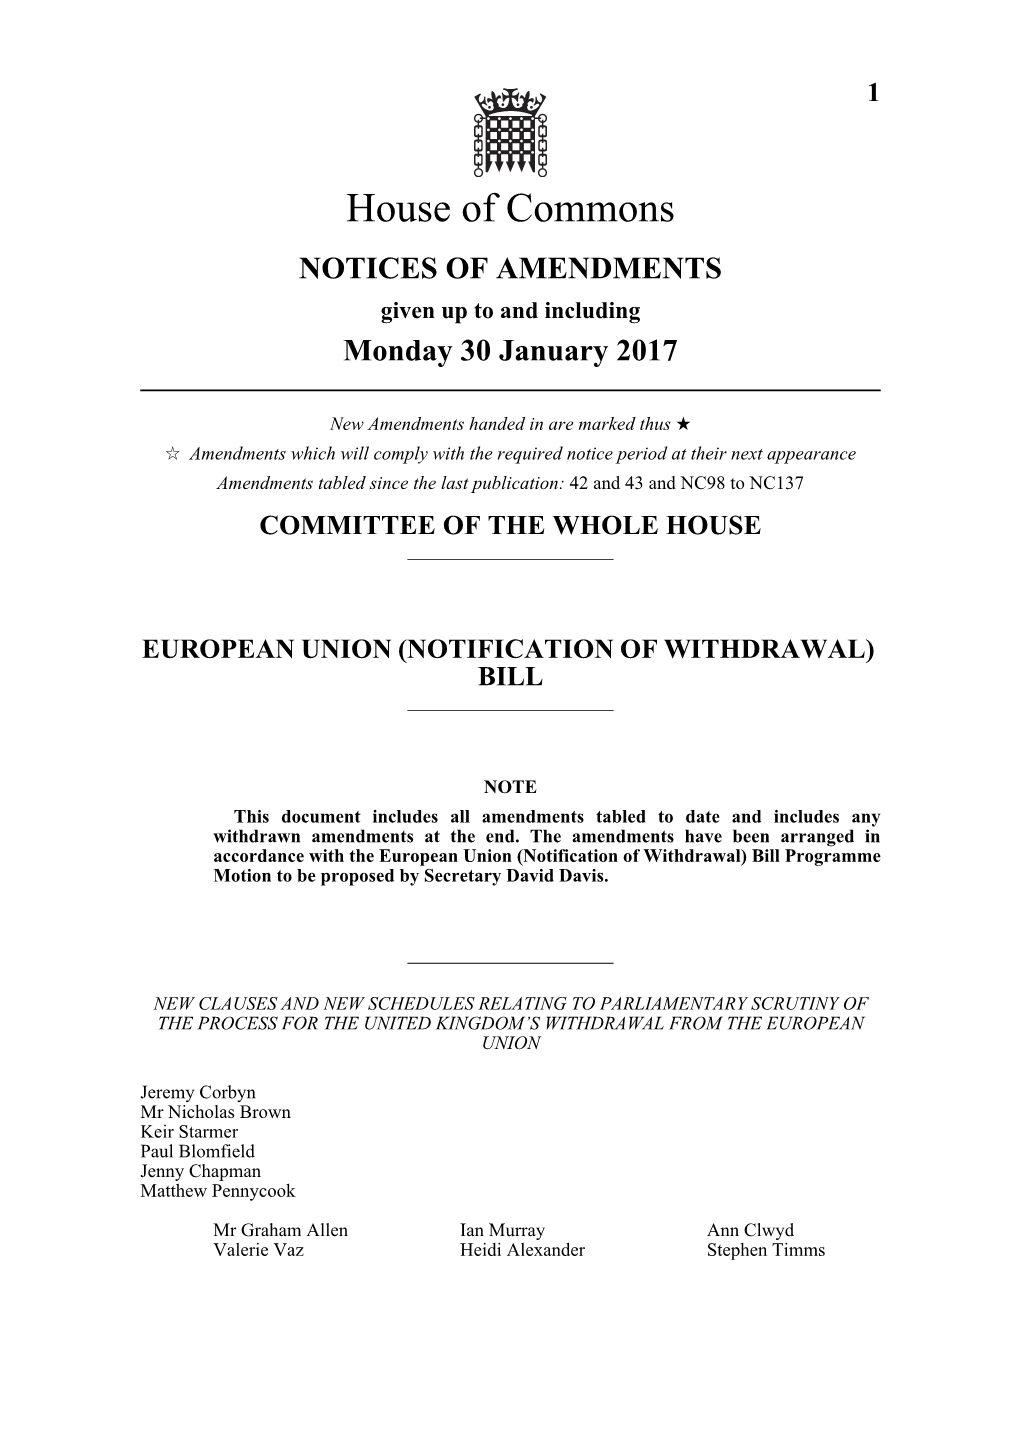 (Notification of Withdrawal) Bill